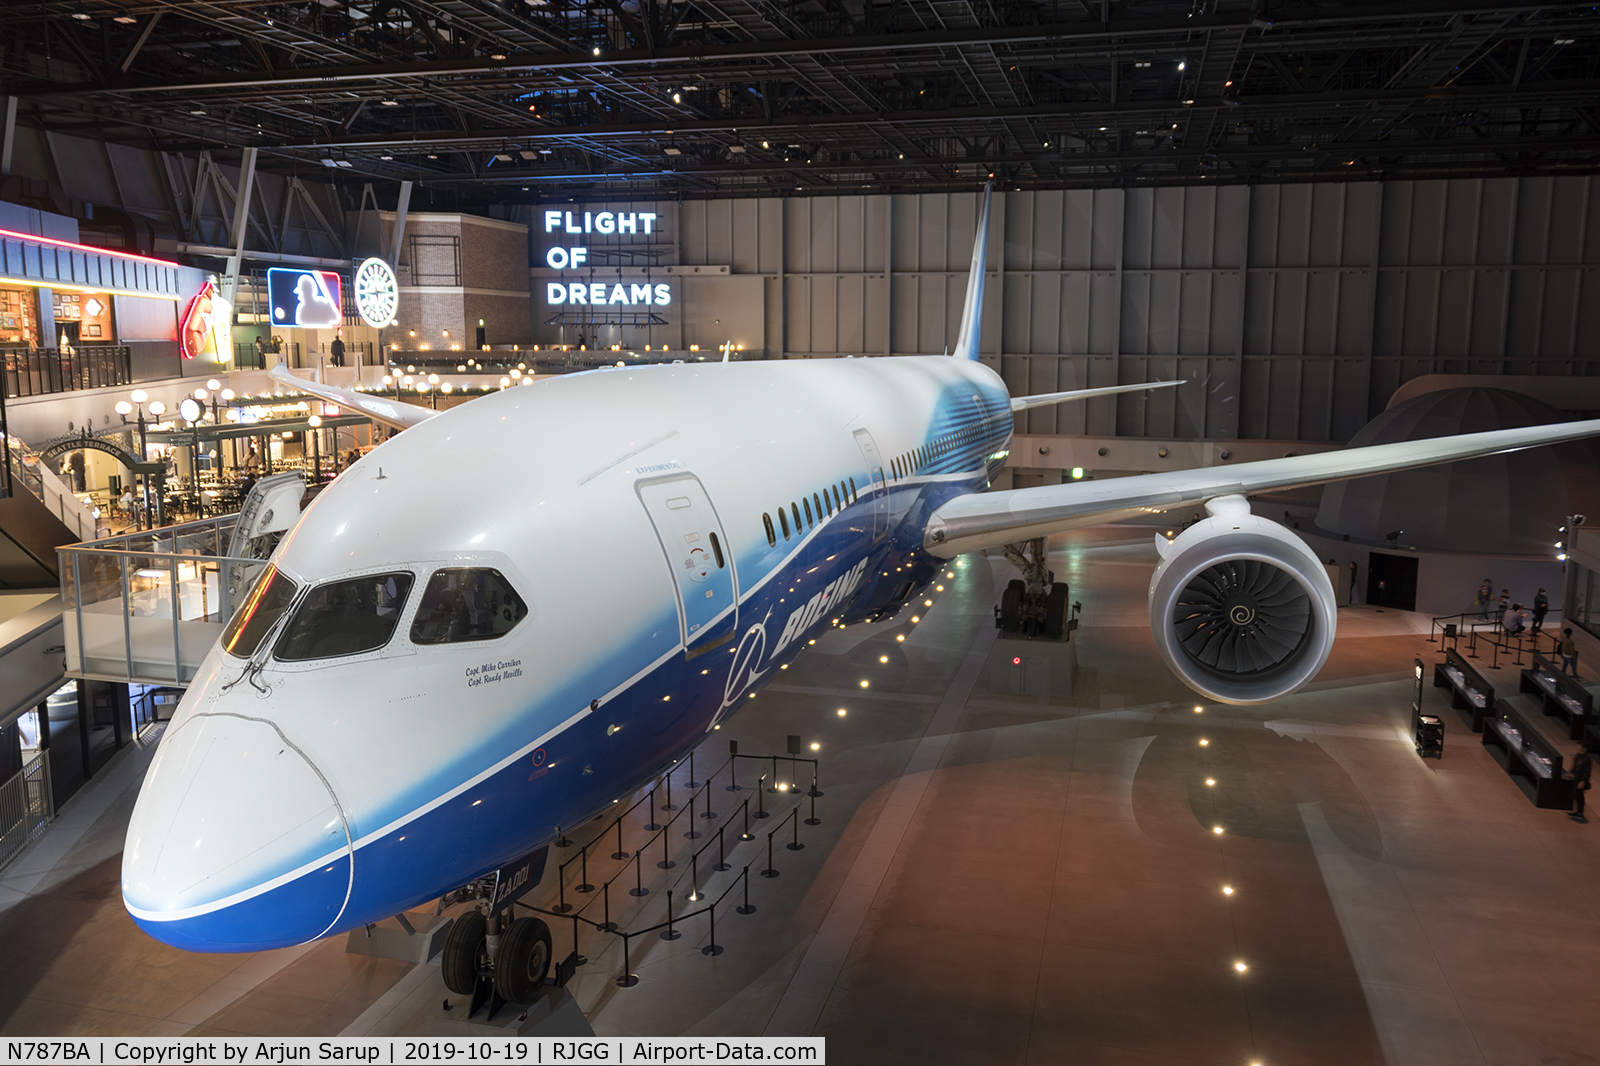 N787BA, 2009 Boeing 787-8 Dreamliner C/N 40690, On display at Flight of Dreams at Chubu Centrair airport.  This is the prototype 787-8 that was donated by Boeing to Nagoya after Japan’s aerospace industry played a large part in developing and financing the Dreamliner.